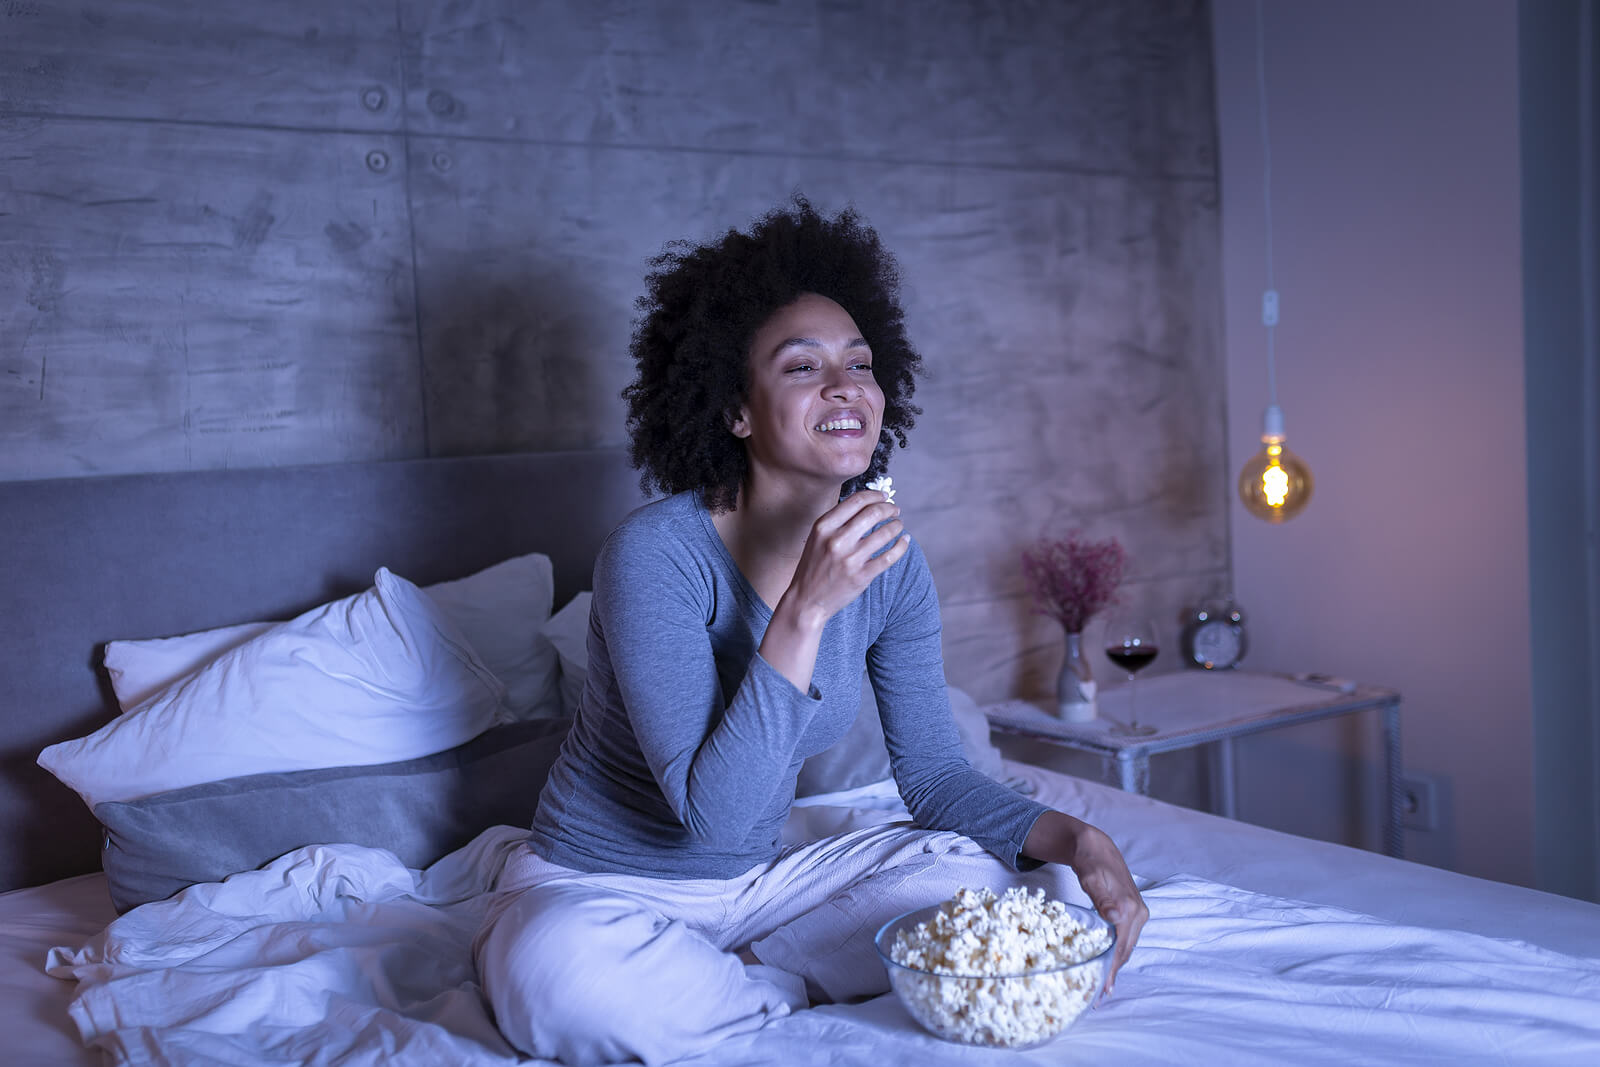 A woman eating popcorn and watching TV in her bedroom, alone